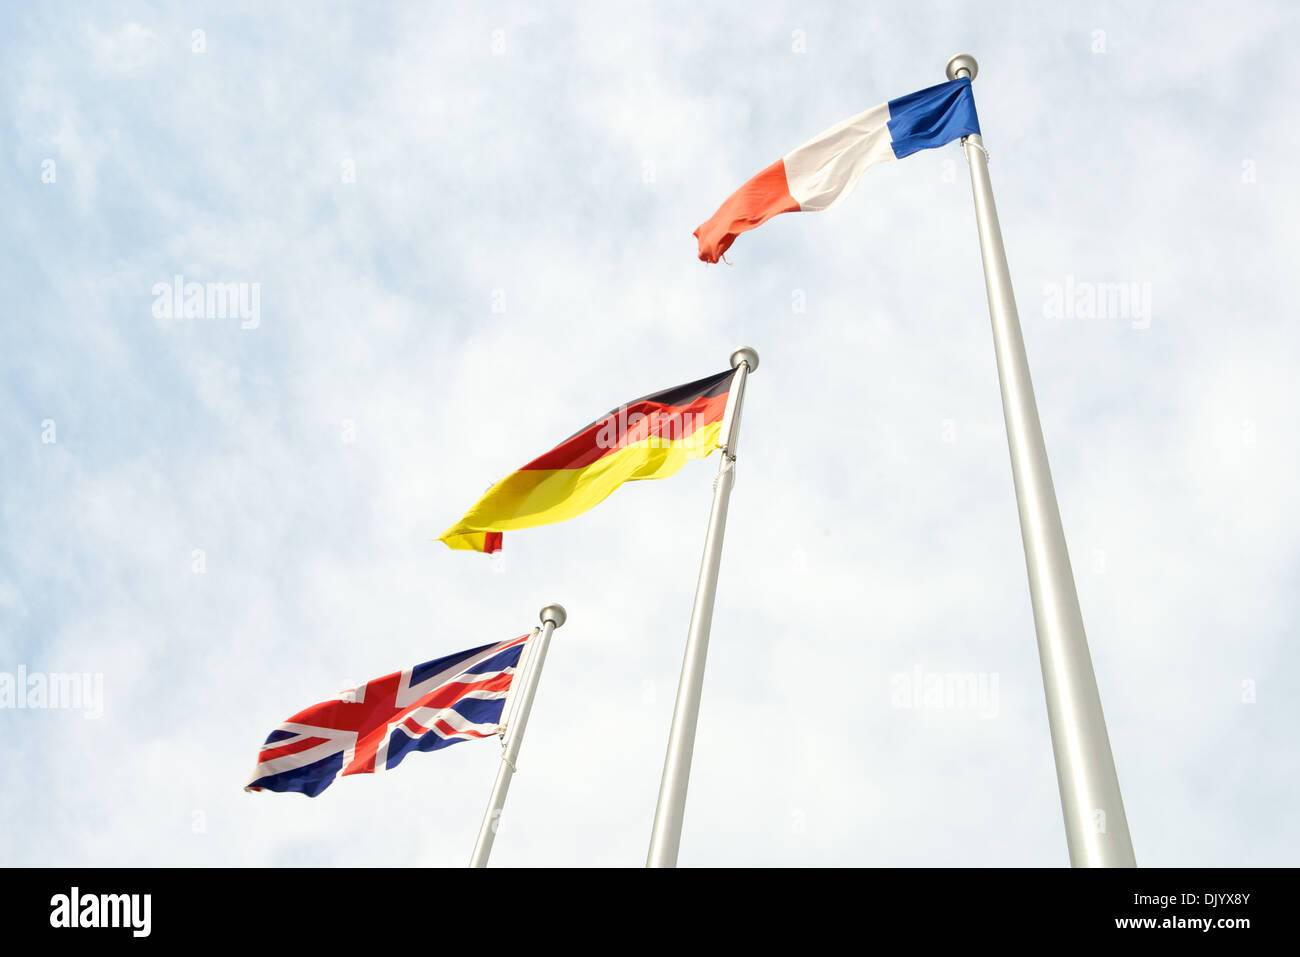 International European Country Flags ranking in the sky Stock Photo